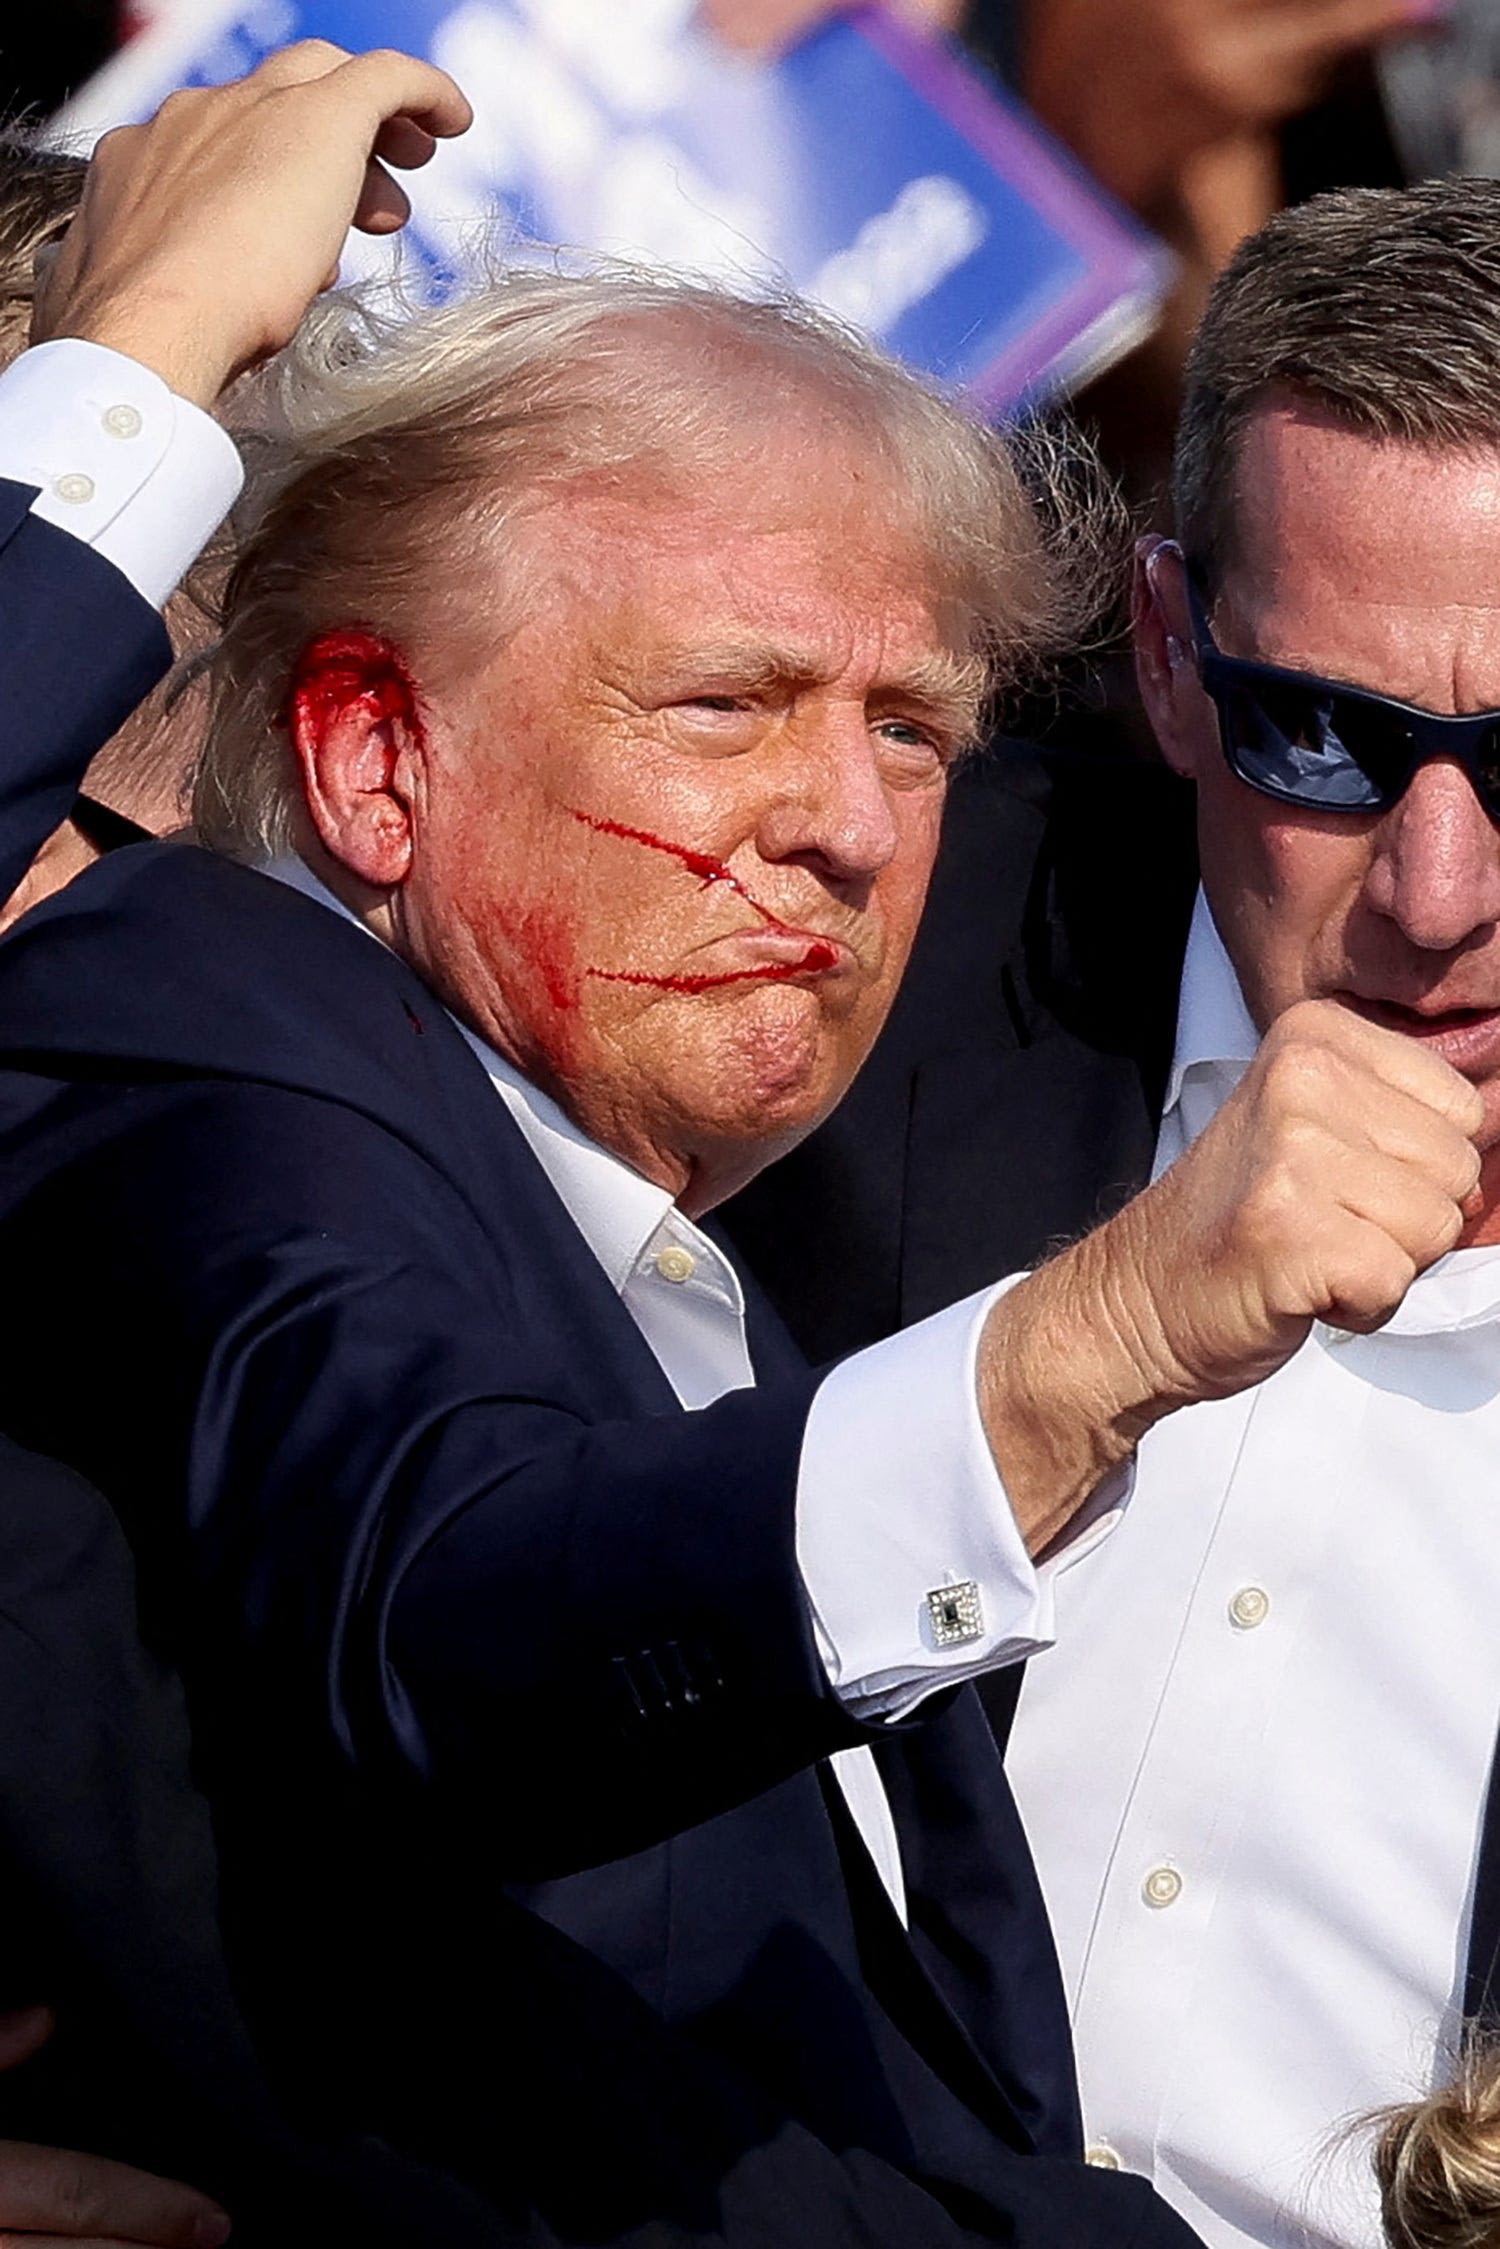 Did Trump get shot? Here's what Texas leaders said after assassination attempt at rally